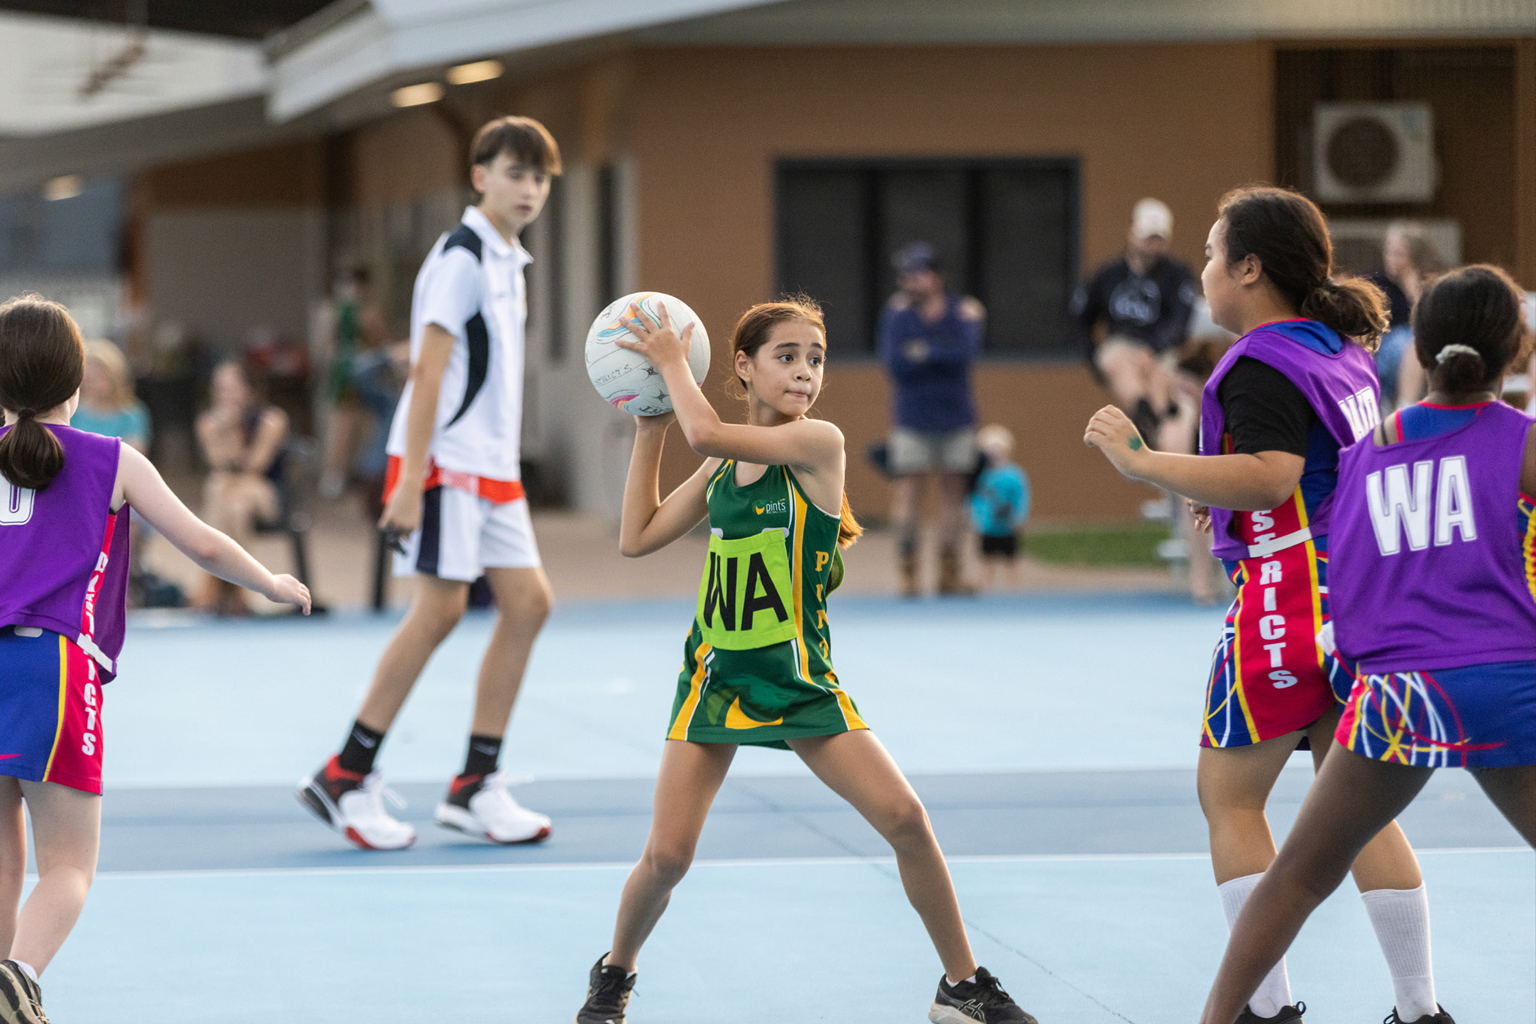 A young girl prepares to pass a netball while a netball umpire watches in the background